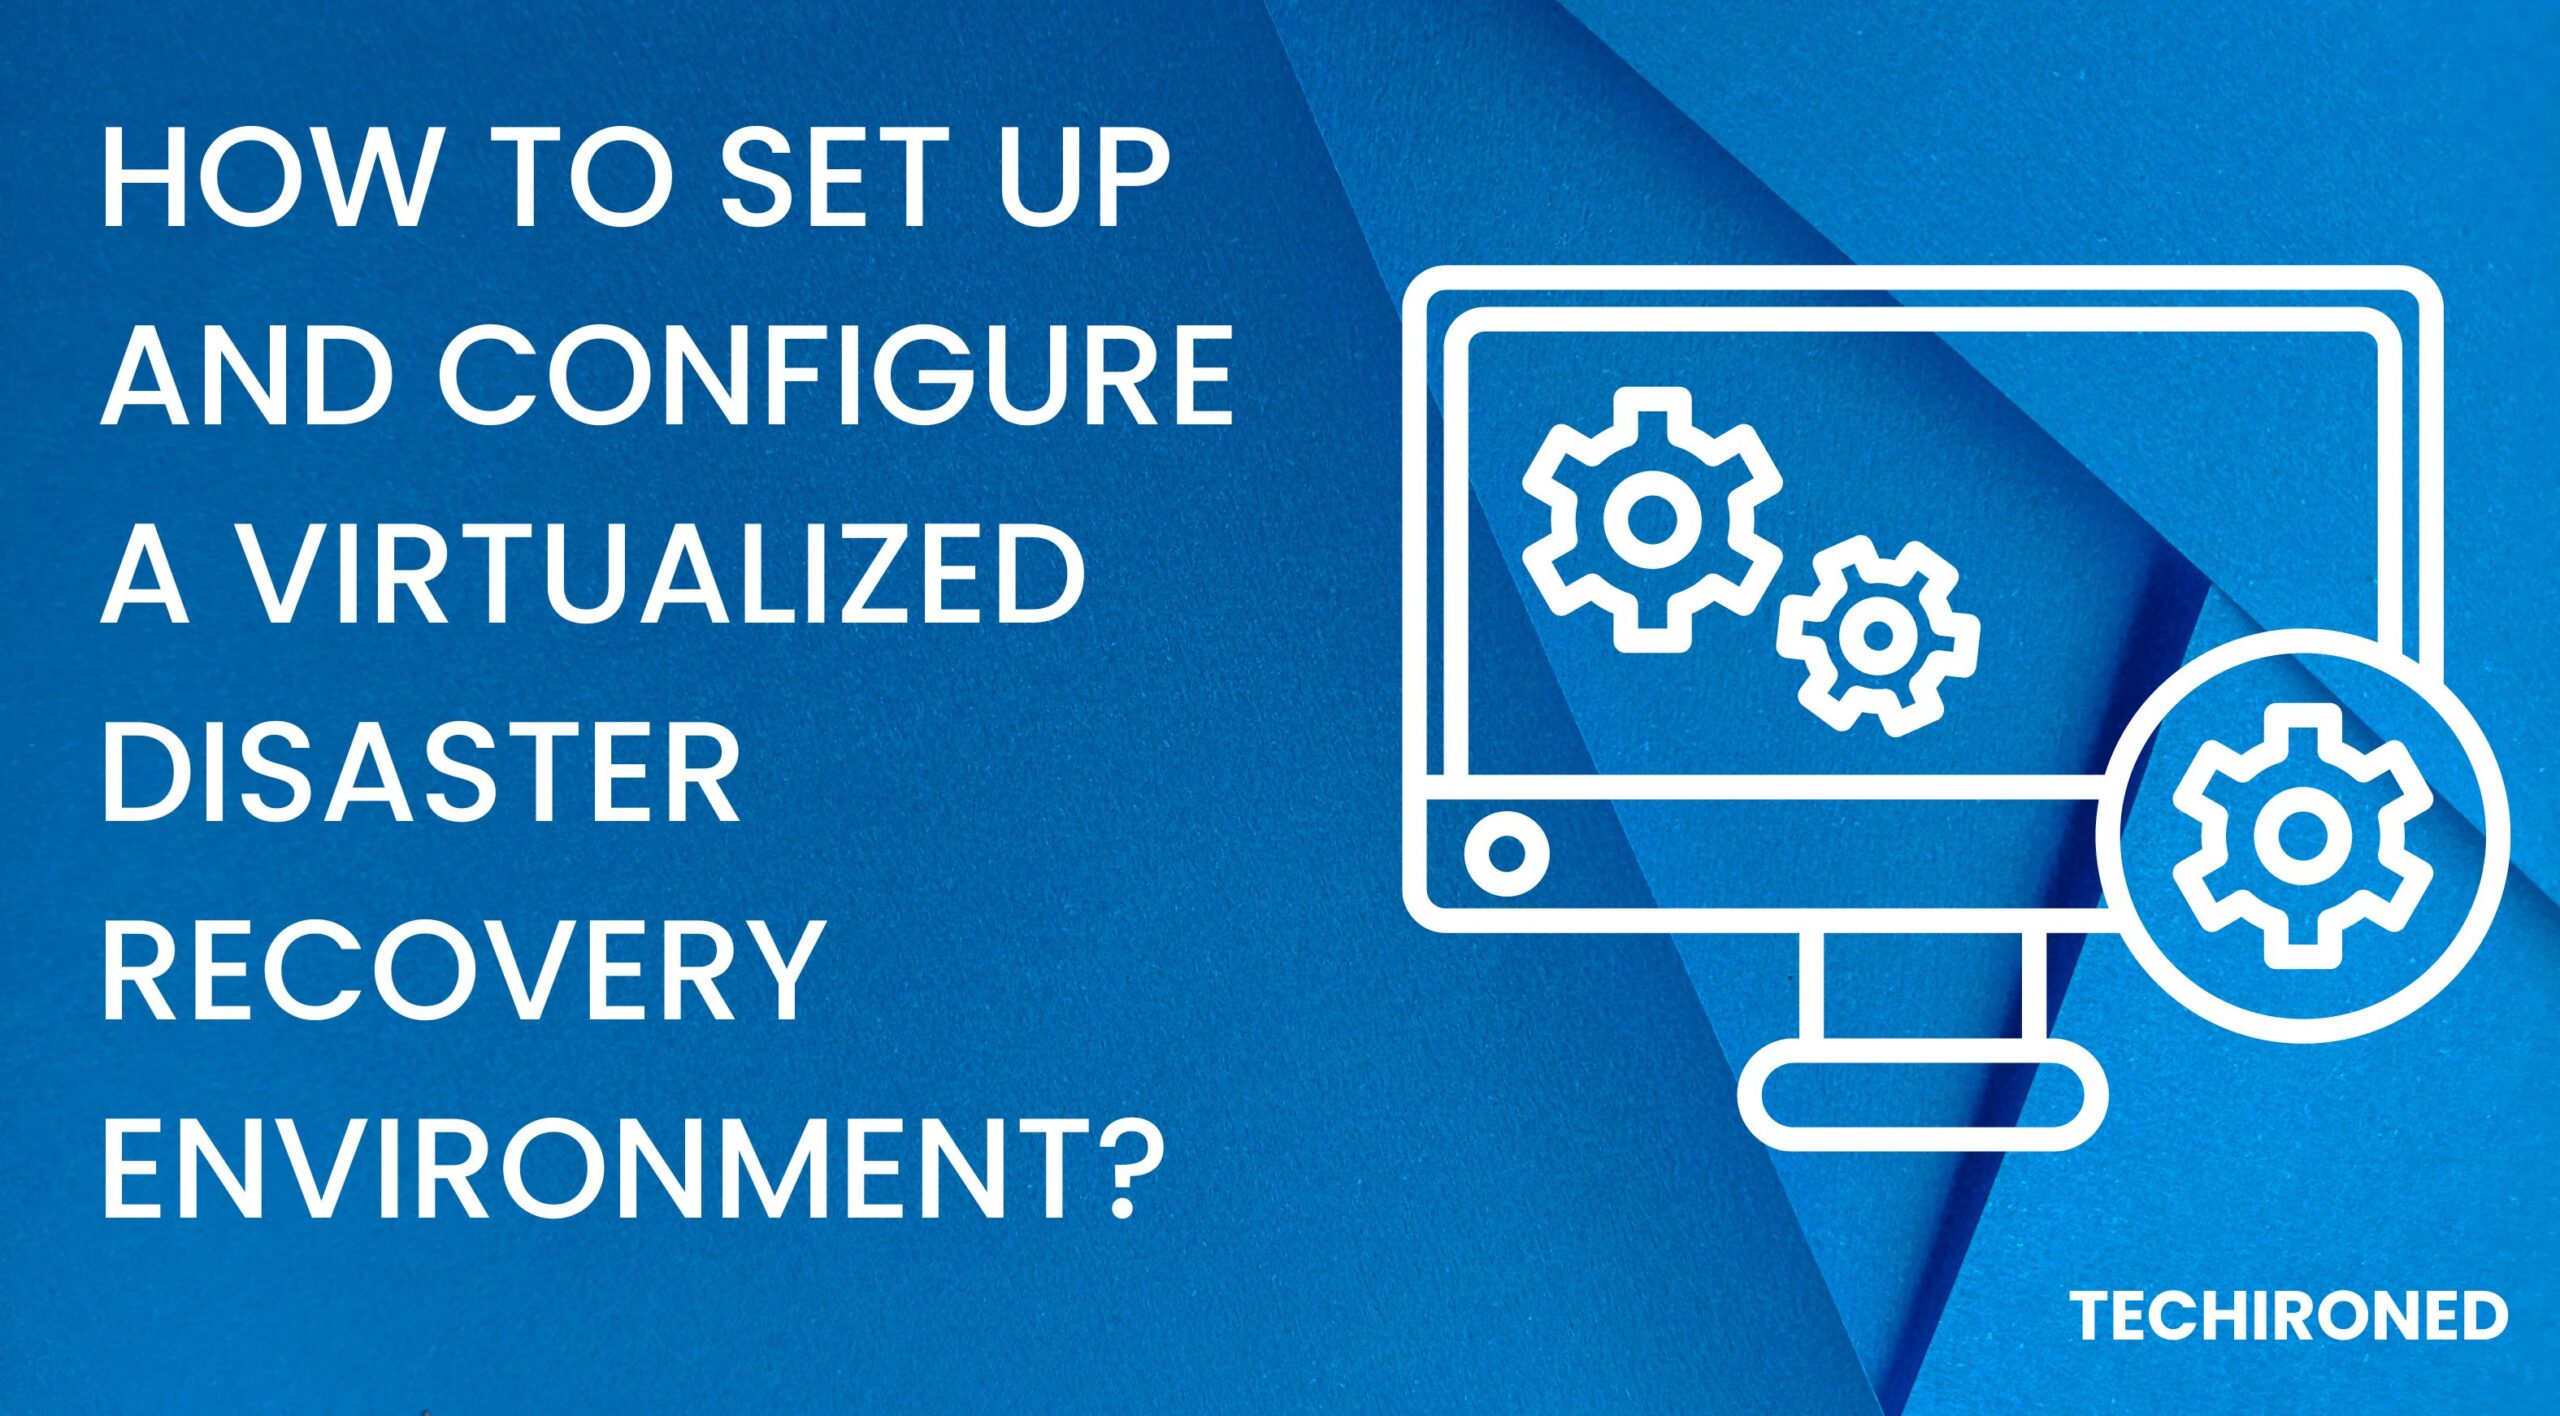 Set Up and Configure a Virtualized Disaster Recovery Environment